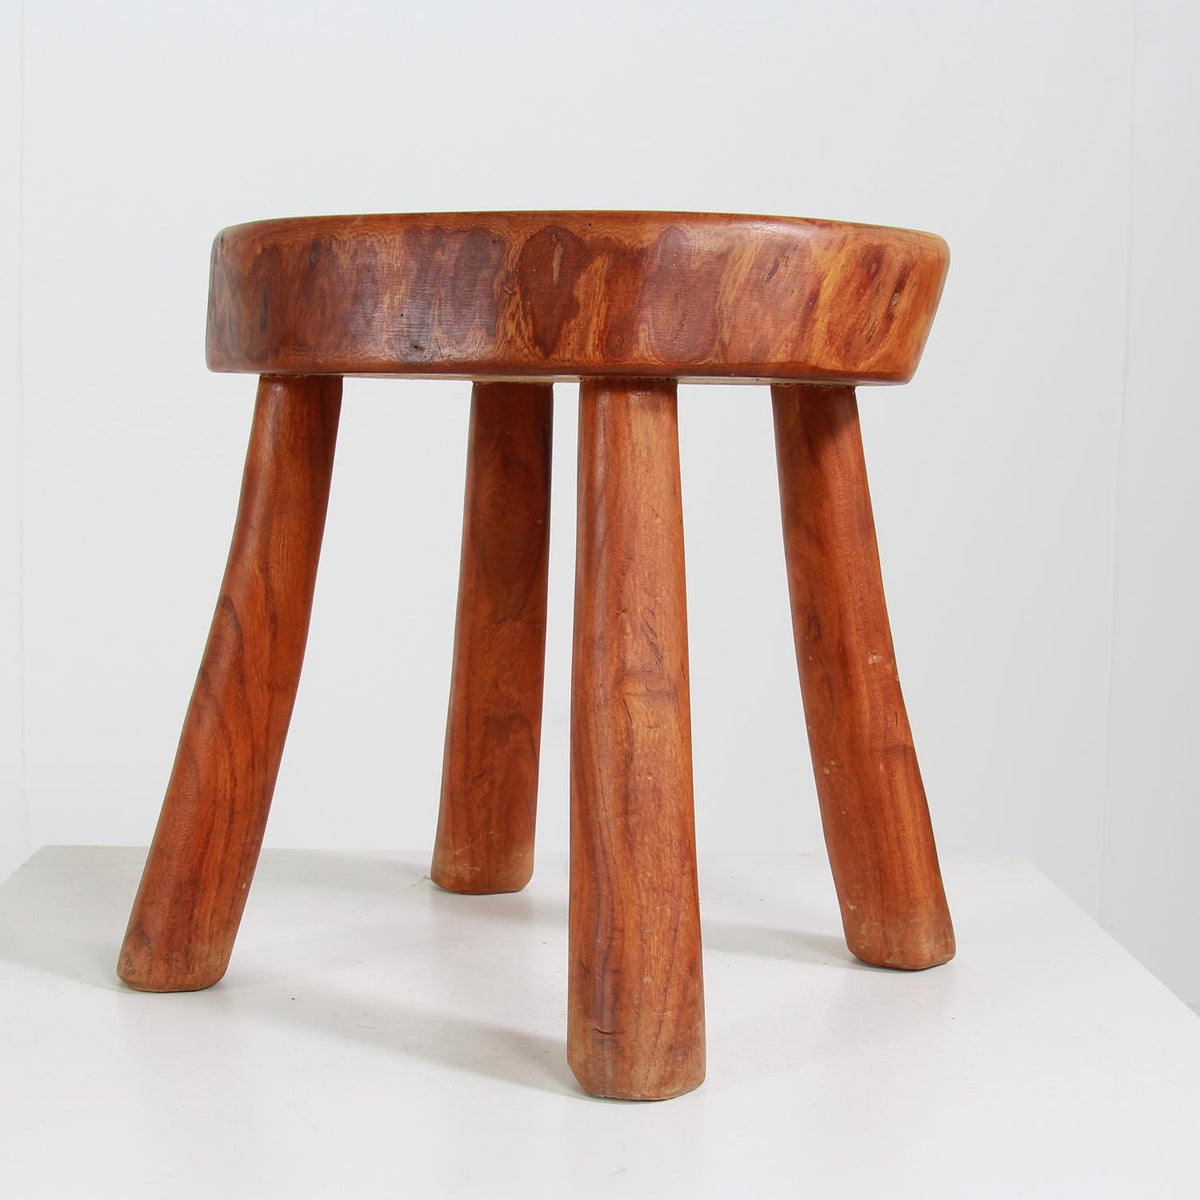 MID-CENTURY MODERN WOODEN STOOL IN THE STYLE OF CHARLOTTE PERRIAND